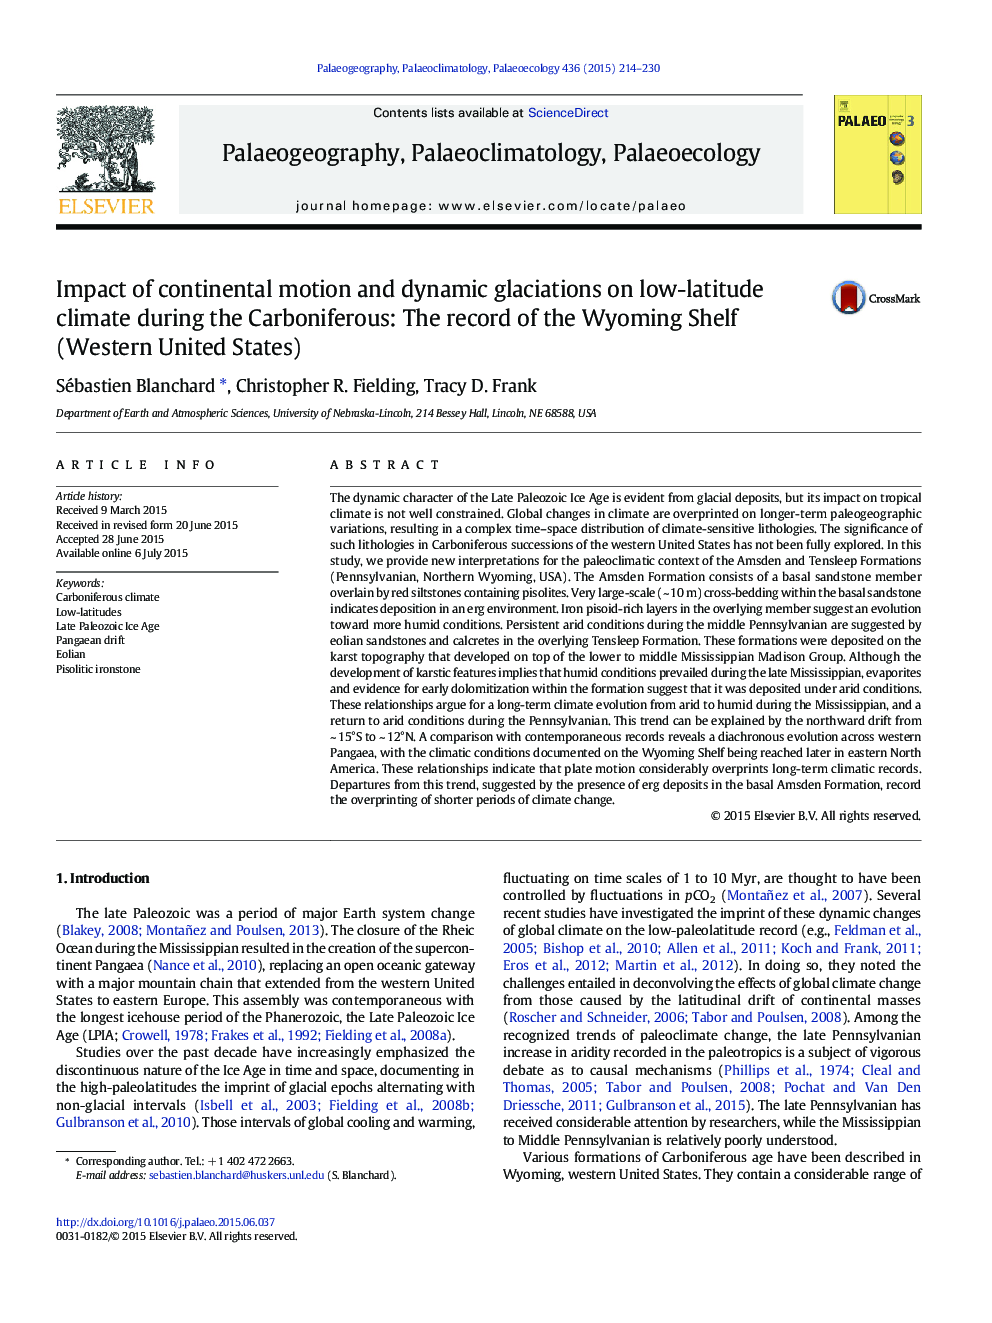 Impact of continental motion and dynamic glaciations on low-latitude climate during the Carboniferous: The record of the Wyoming Shelf (Western United States)